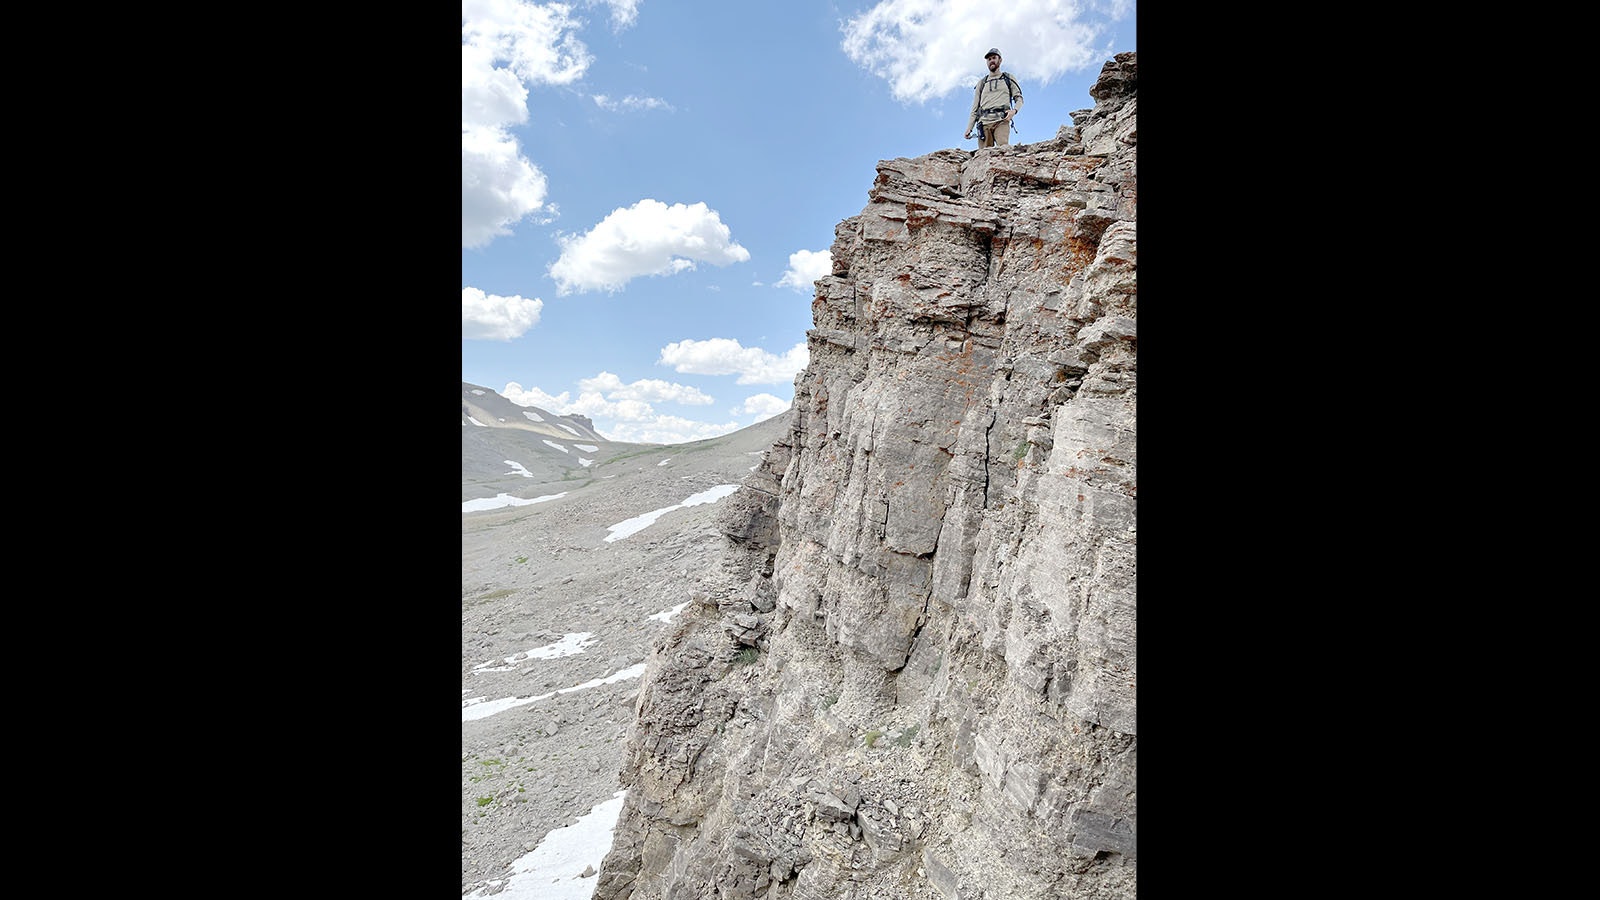 Backcountry Hiker David Willms of Cheyenne stands atop a cliff overlooking a notch passage through “The Great Wall” along Wyoming’s remote “Big Balls” hiking trail.